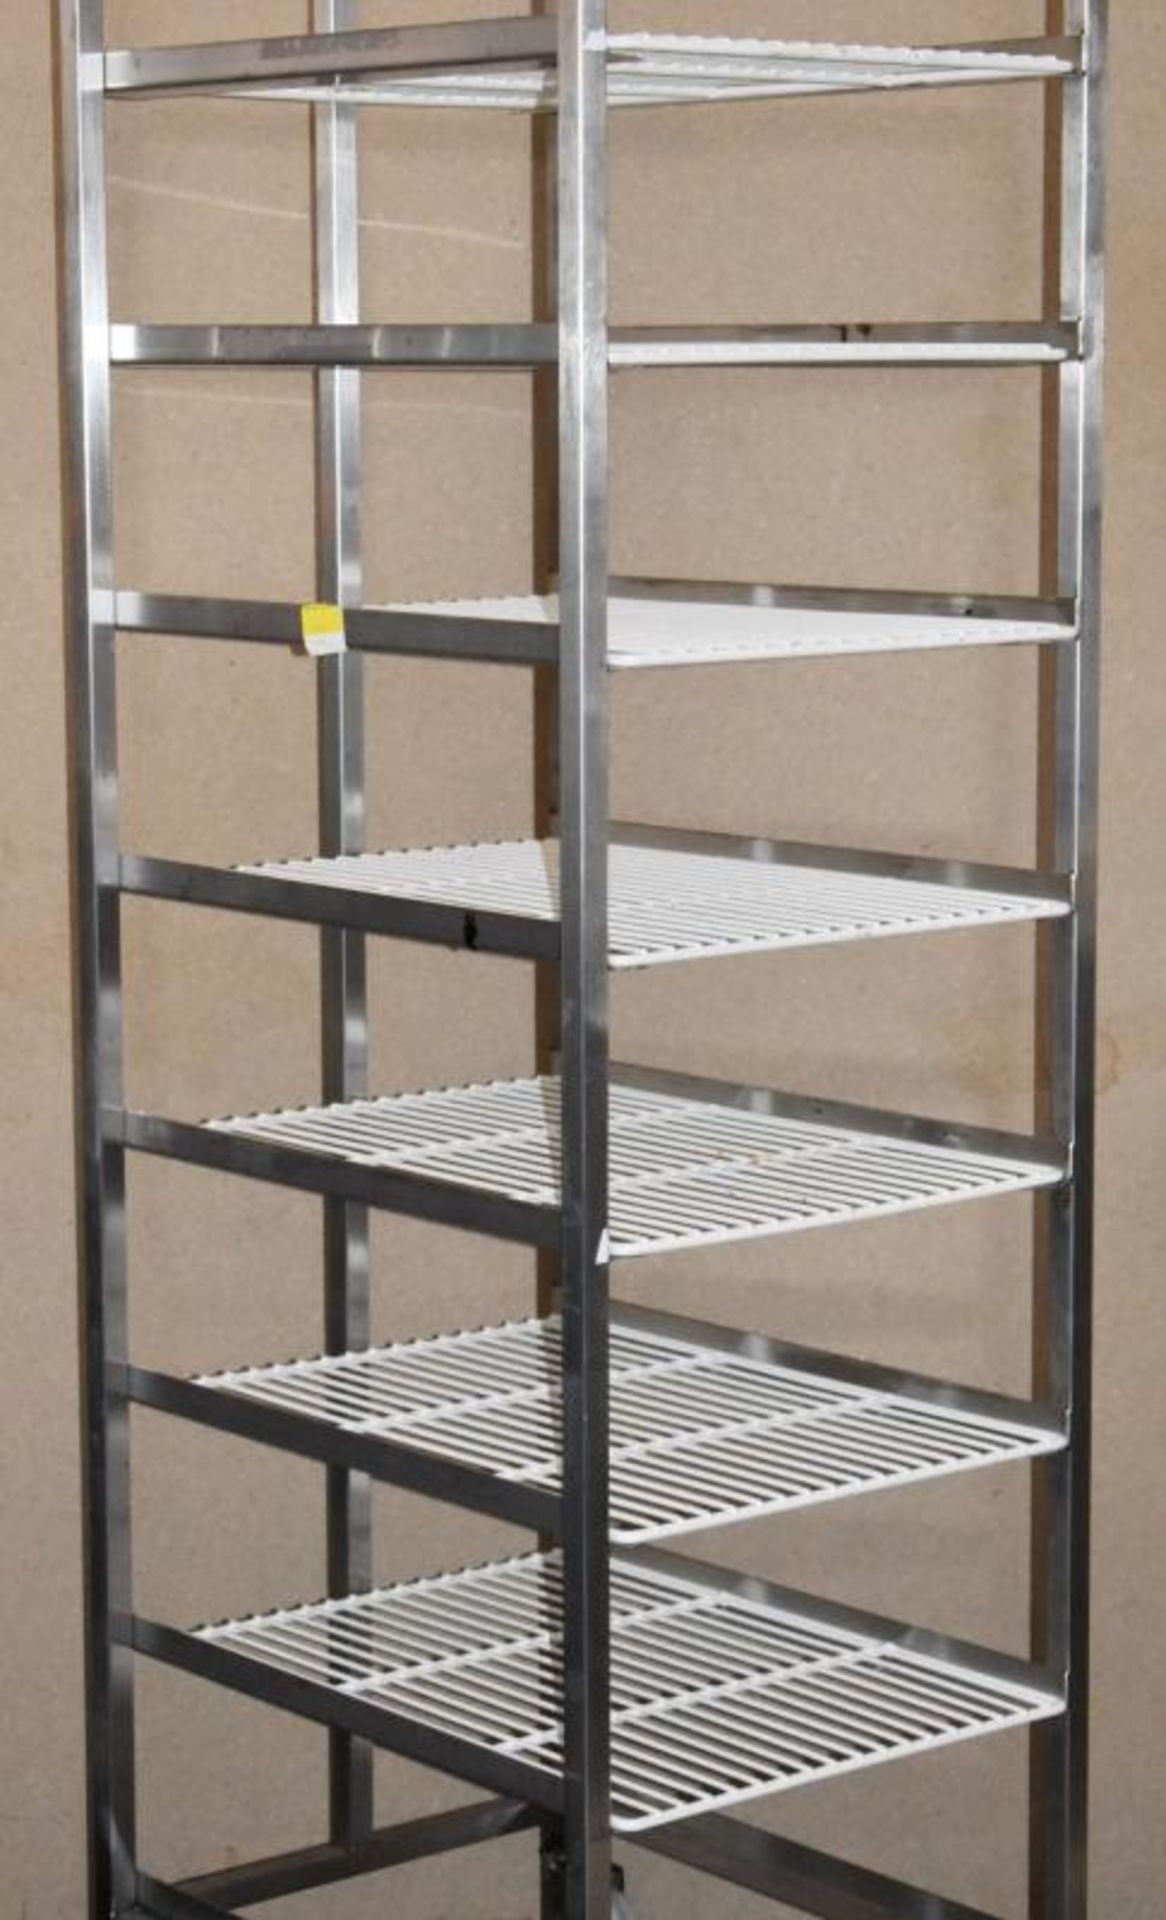 1 x Stainless Steel 8 Tier Mobile Shelf Unit For Commercial Kitchens With White Coated Wire Shelves - Image 5 of 11